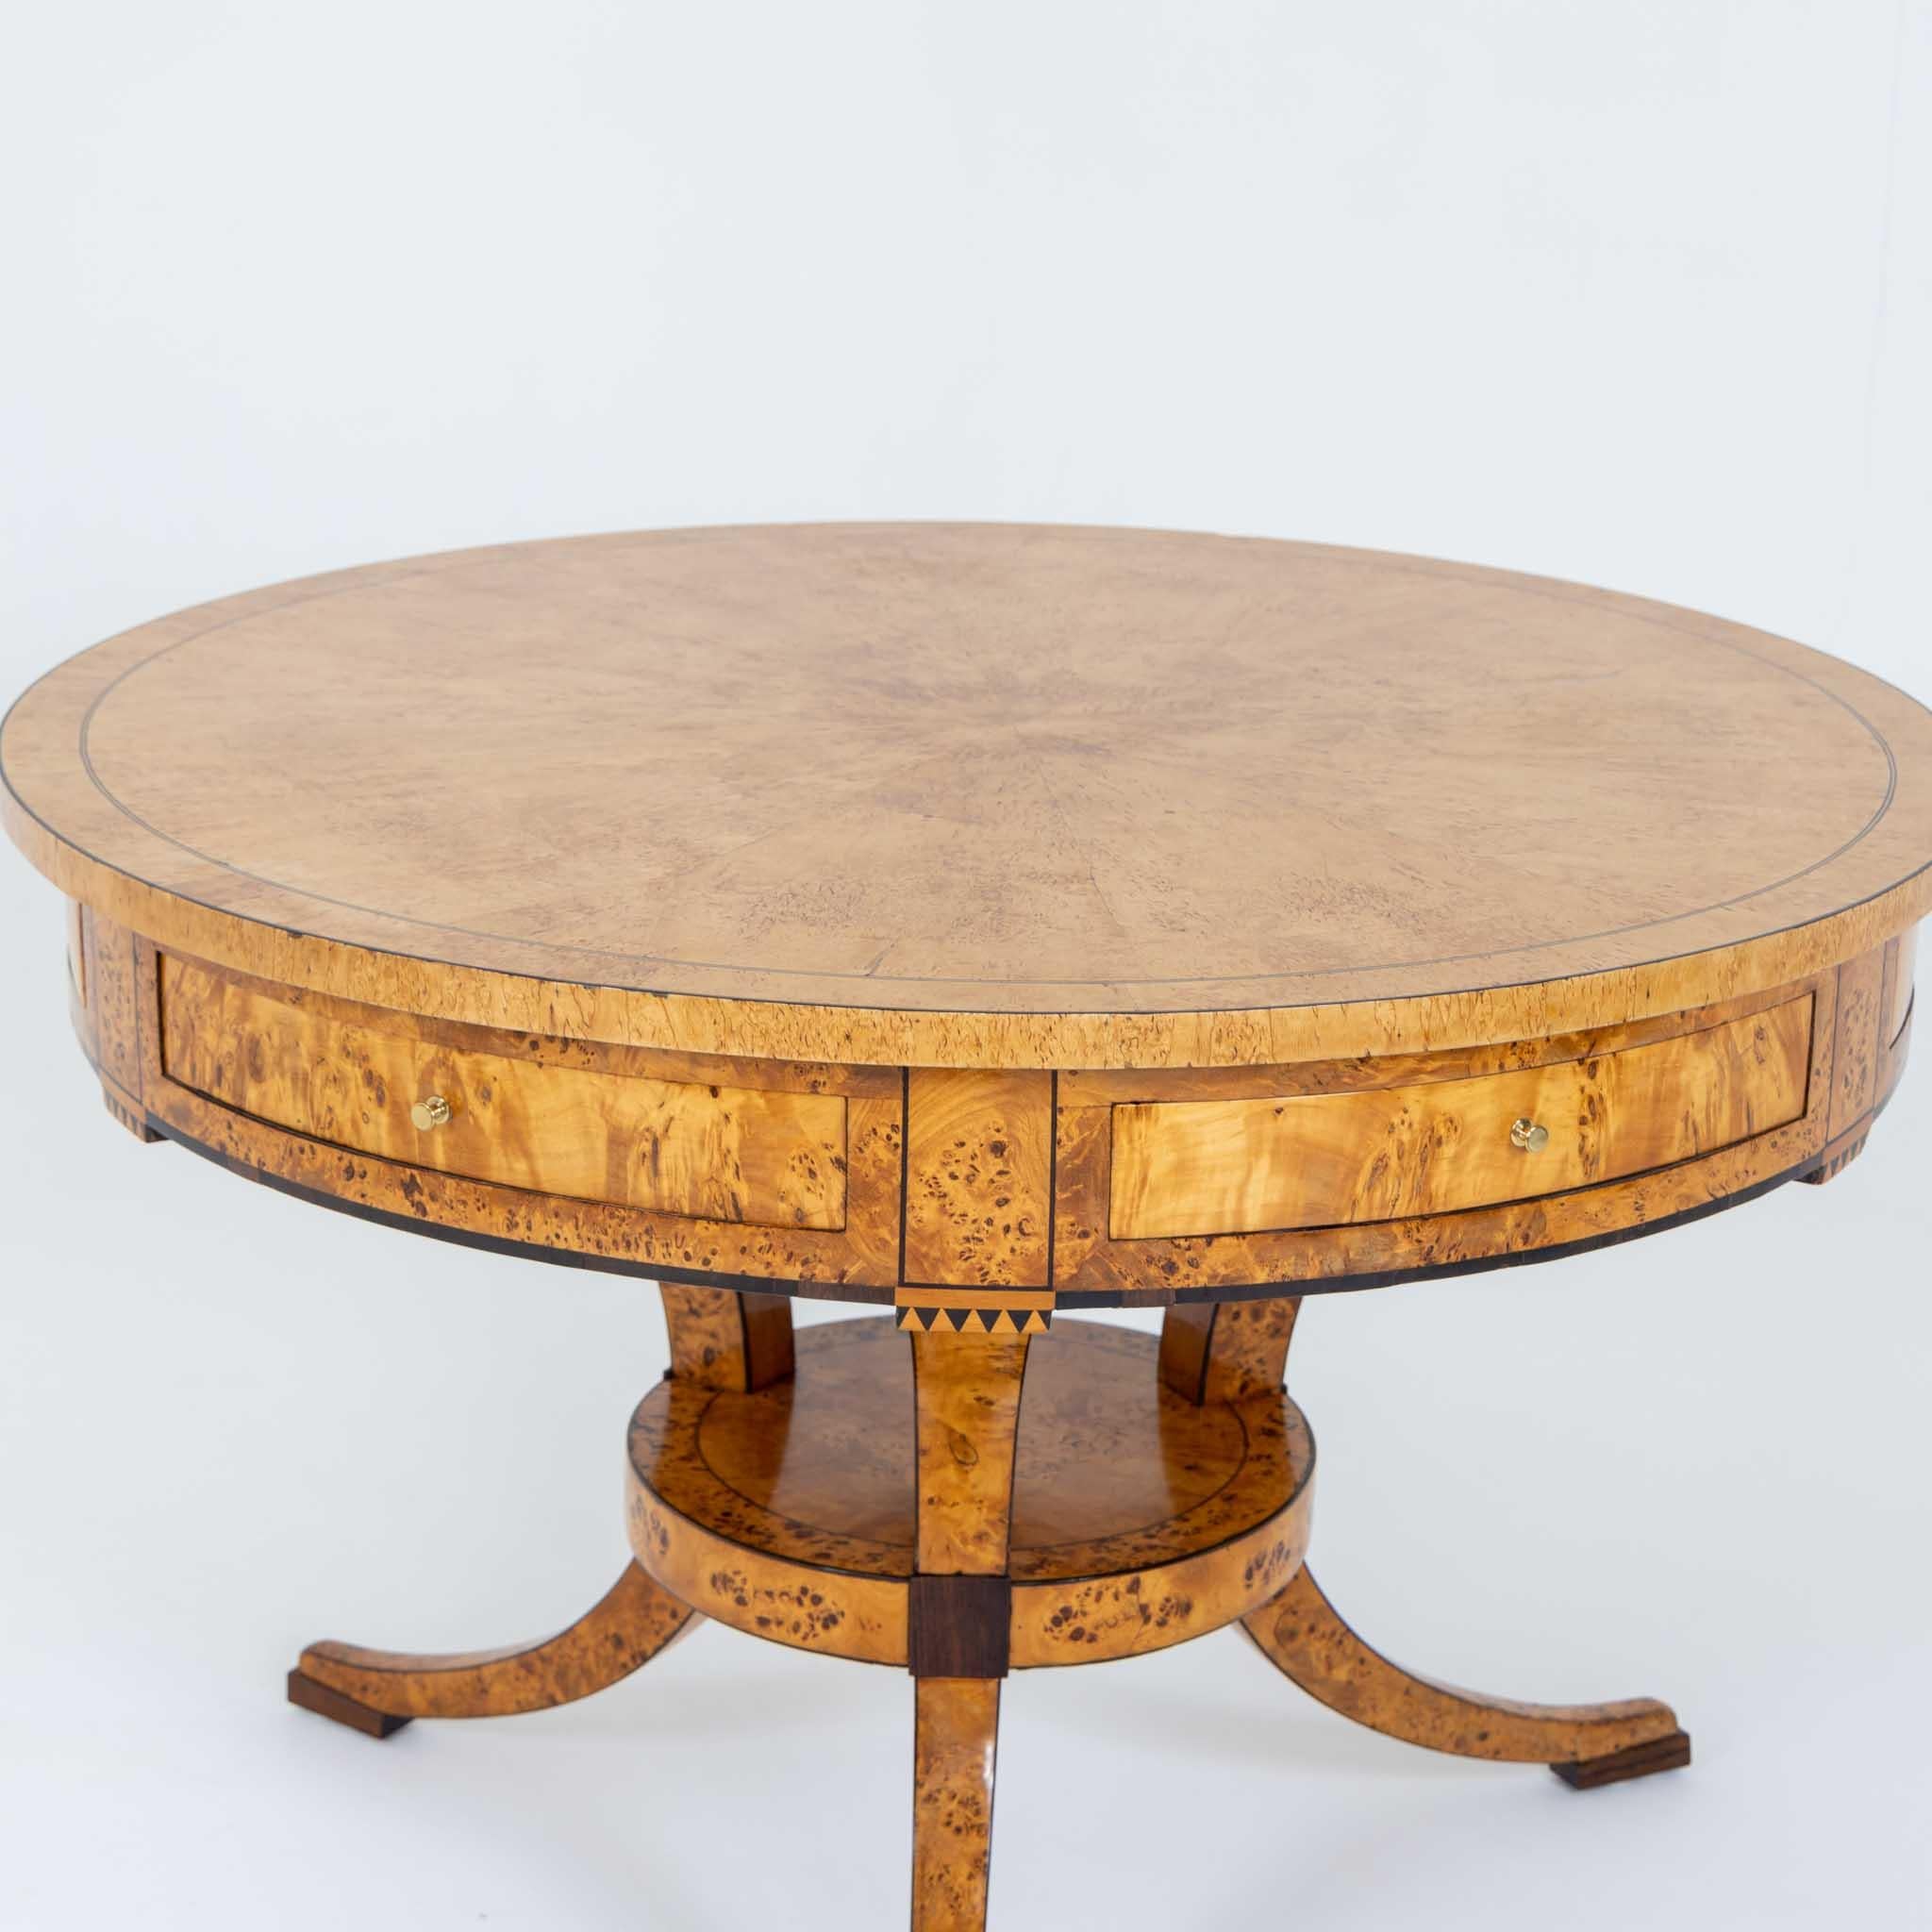 Biedermeier Game Table in Birch, Baltic States, early 19th Century For Sale 5